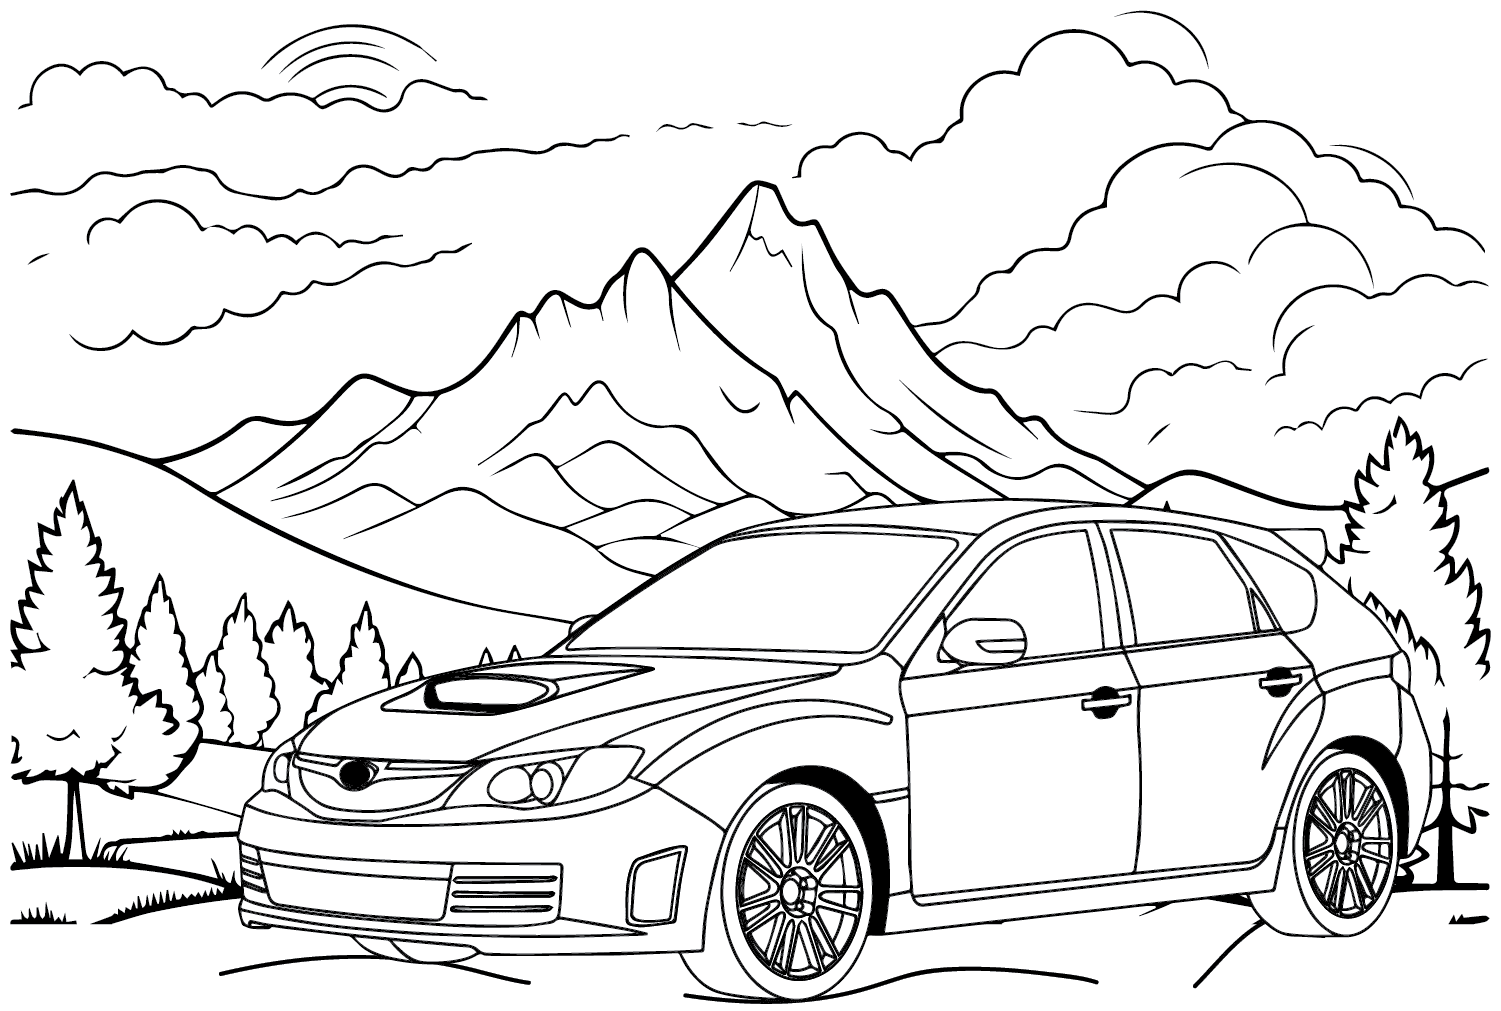 Subaru Coloring Page for Adults - Subaru Coloring Pages - Coloring ...